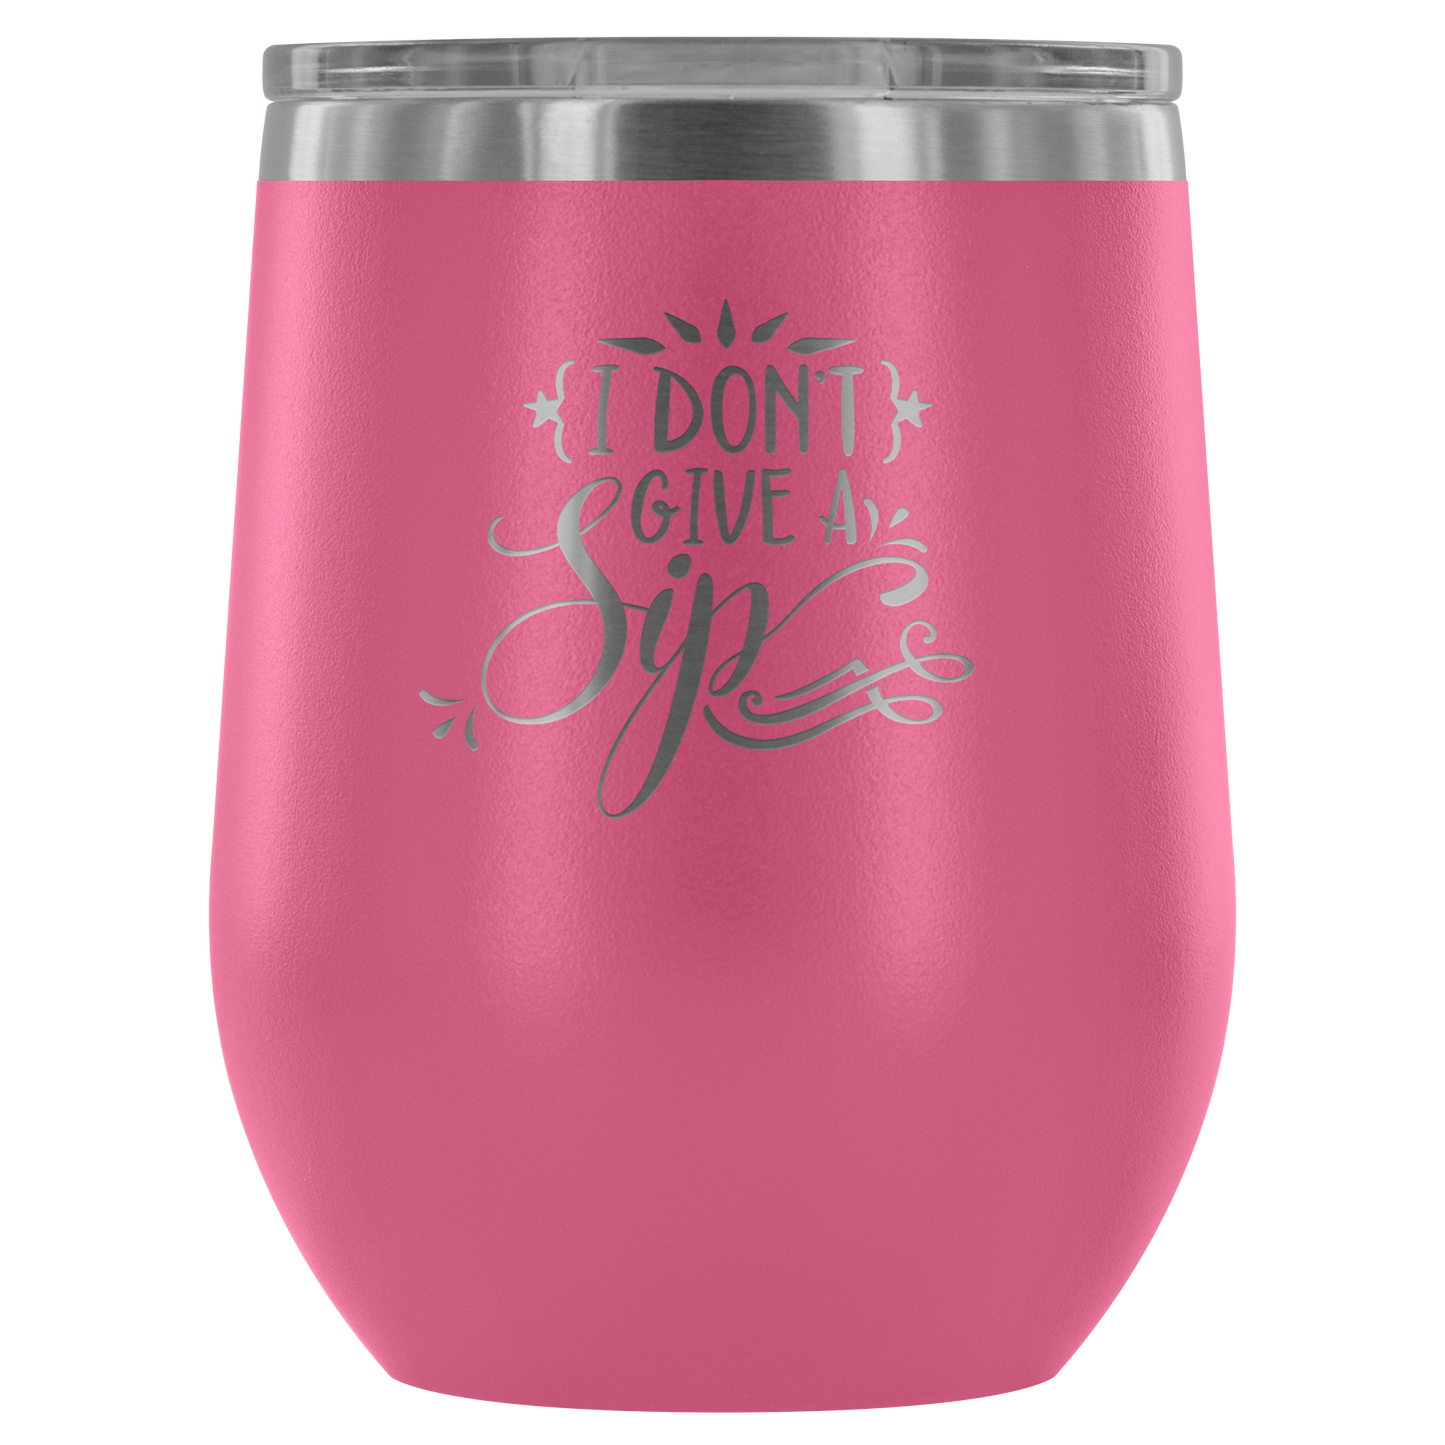 I Don't Give a Sip.... Stemless Wine tumbler 12 oz Stainless steel wine lovers Gift for her